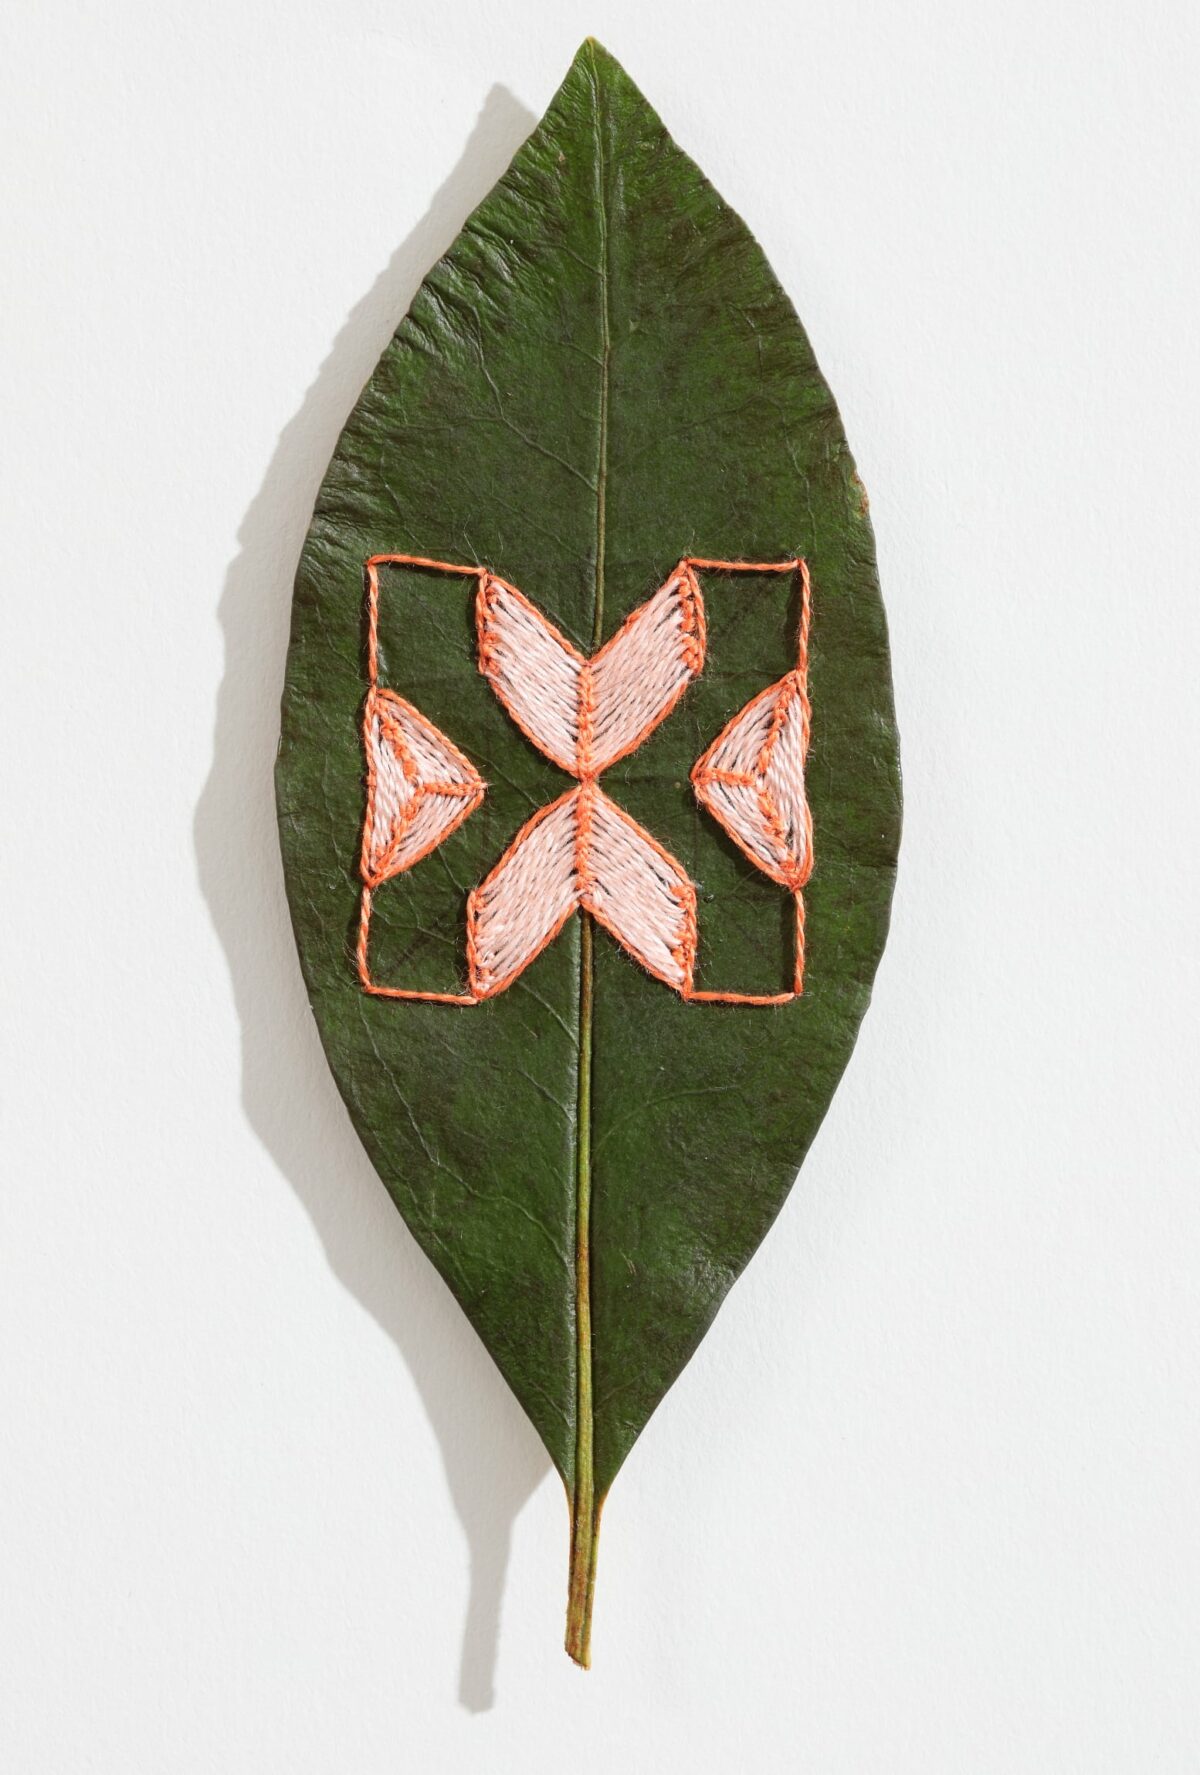 The Fascinating Embroidered Leaf Art Of Hillary Waters Fayle (7)